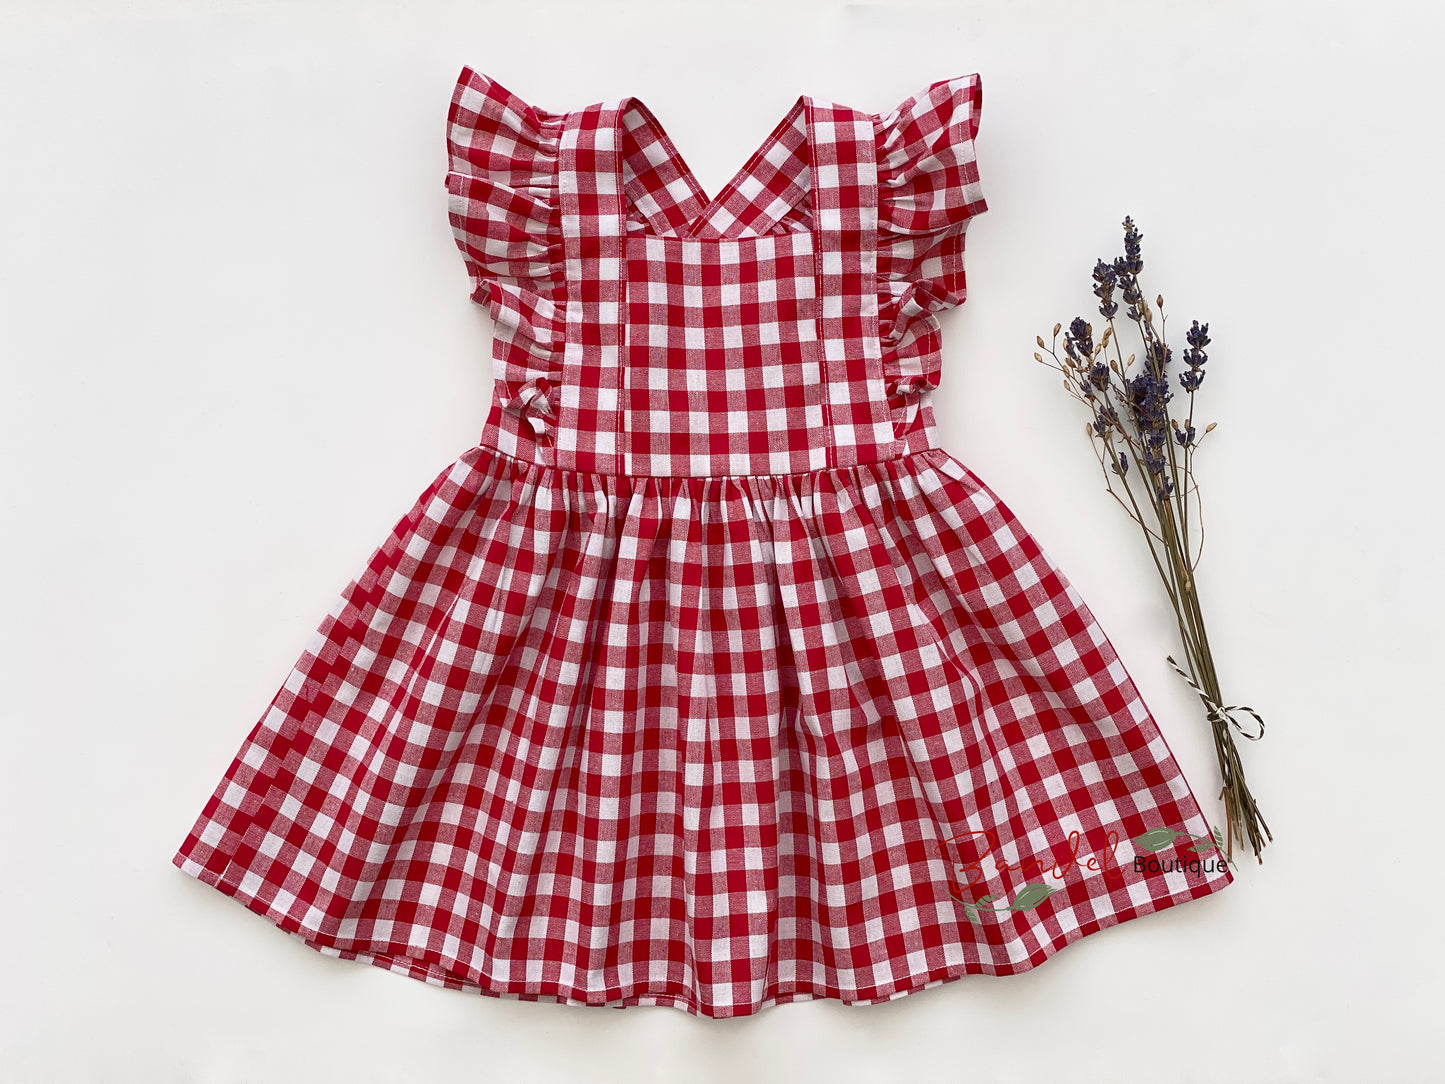 Classic Red Gingham Vintage Dress for girls features adjustable straps, ruffled sleeves, and a full gathered skirt for a timeless look.